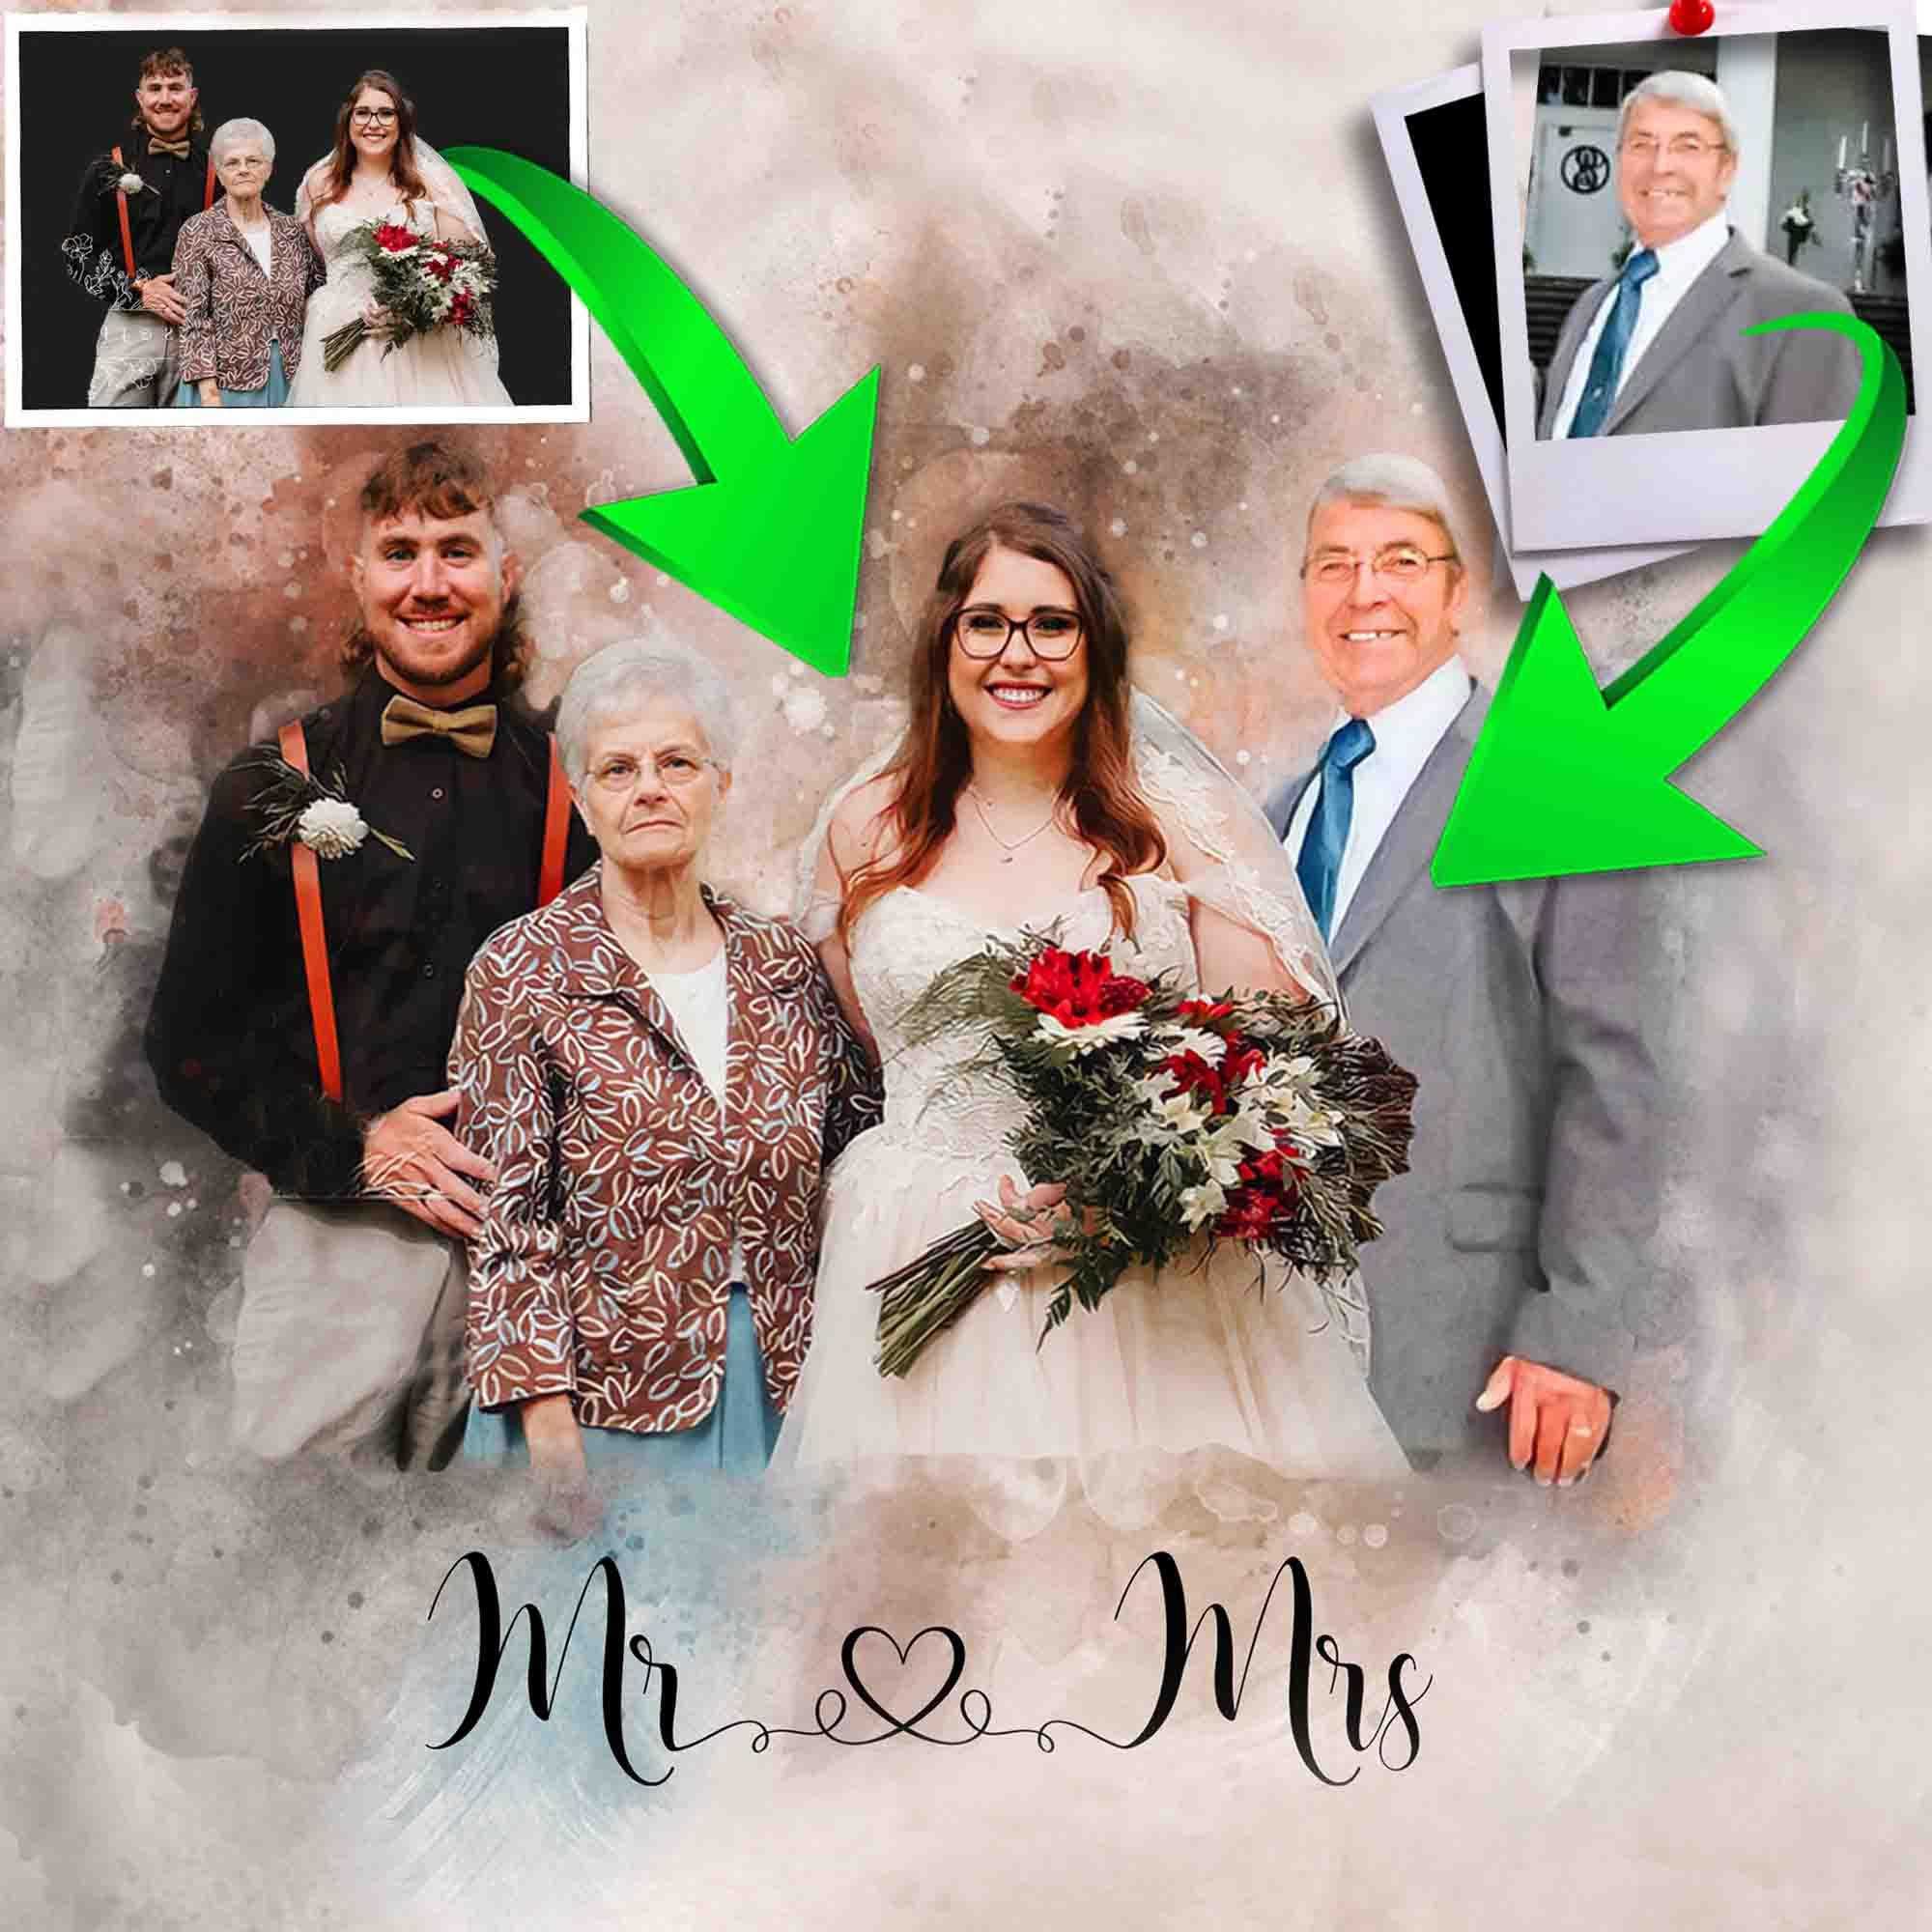 🌈 Add People to Photo | Add Someone into a Picture | Add Deceased Loved One | Loss Loved One | Custom Wedding Family Portrait | Merge Photos Into Painting | Combine Photos | Personalized Gifts - FromPicToArt